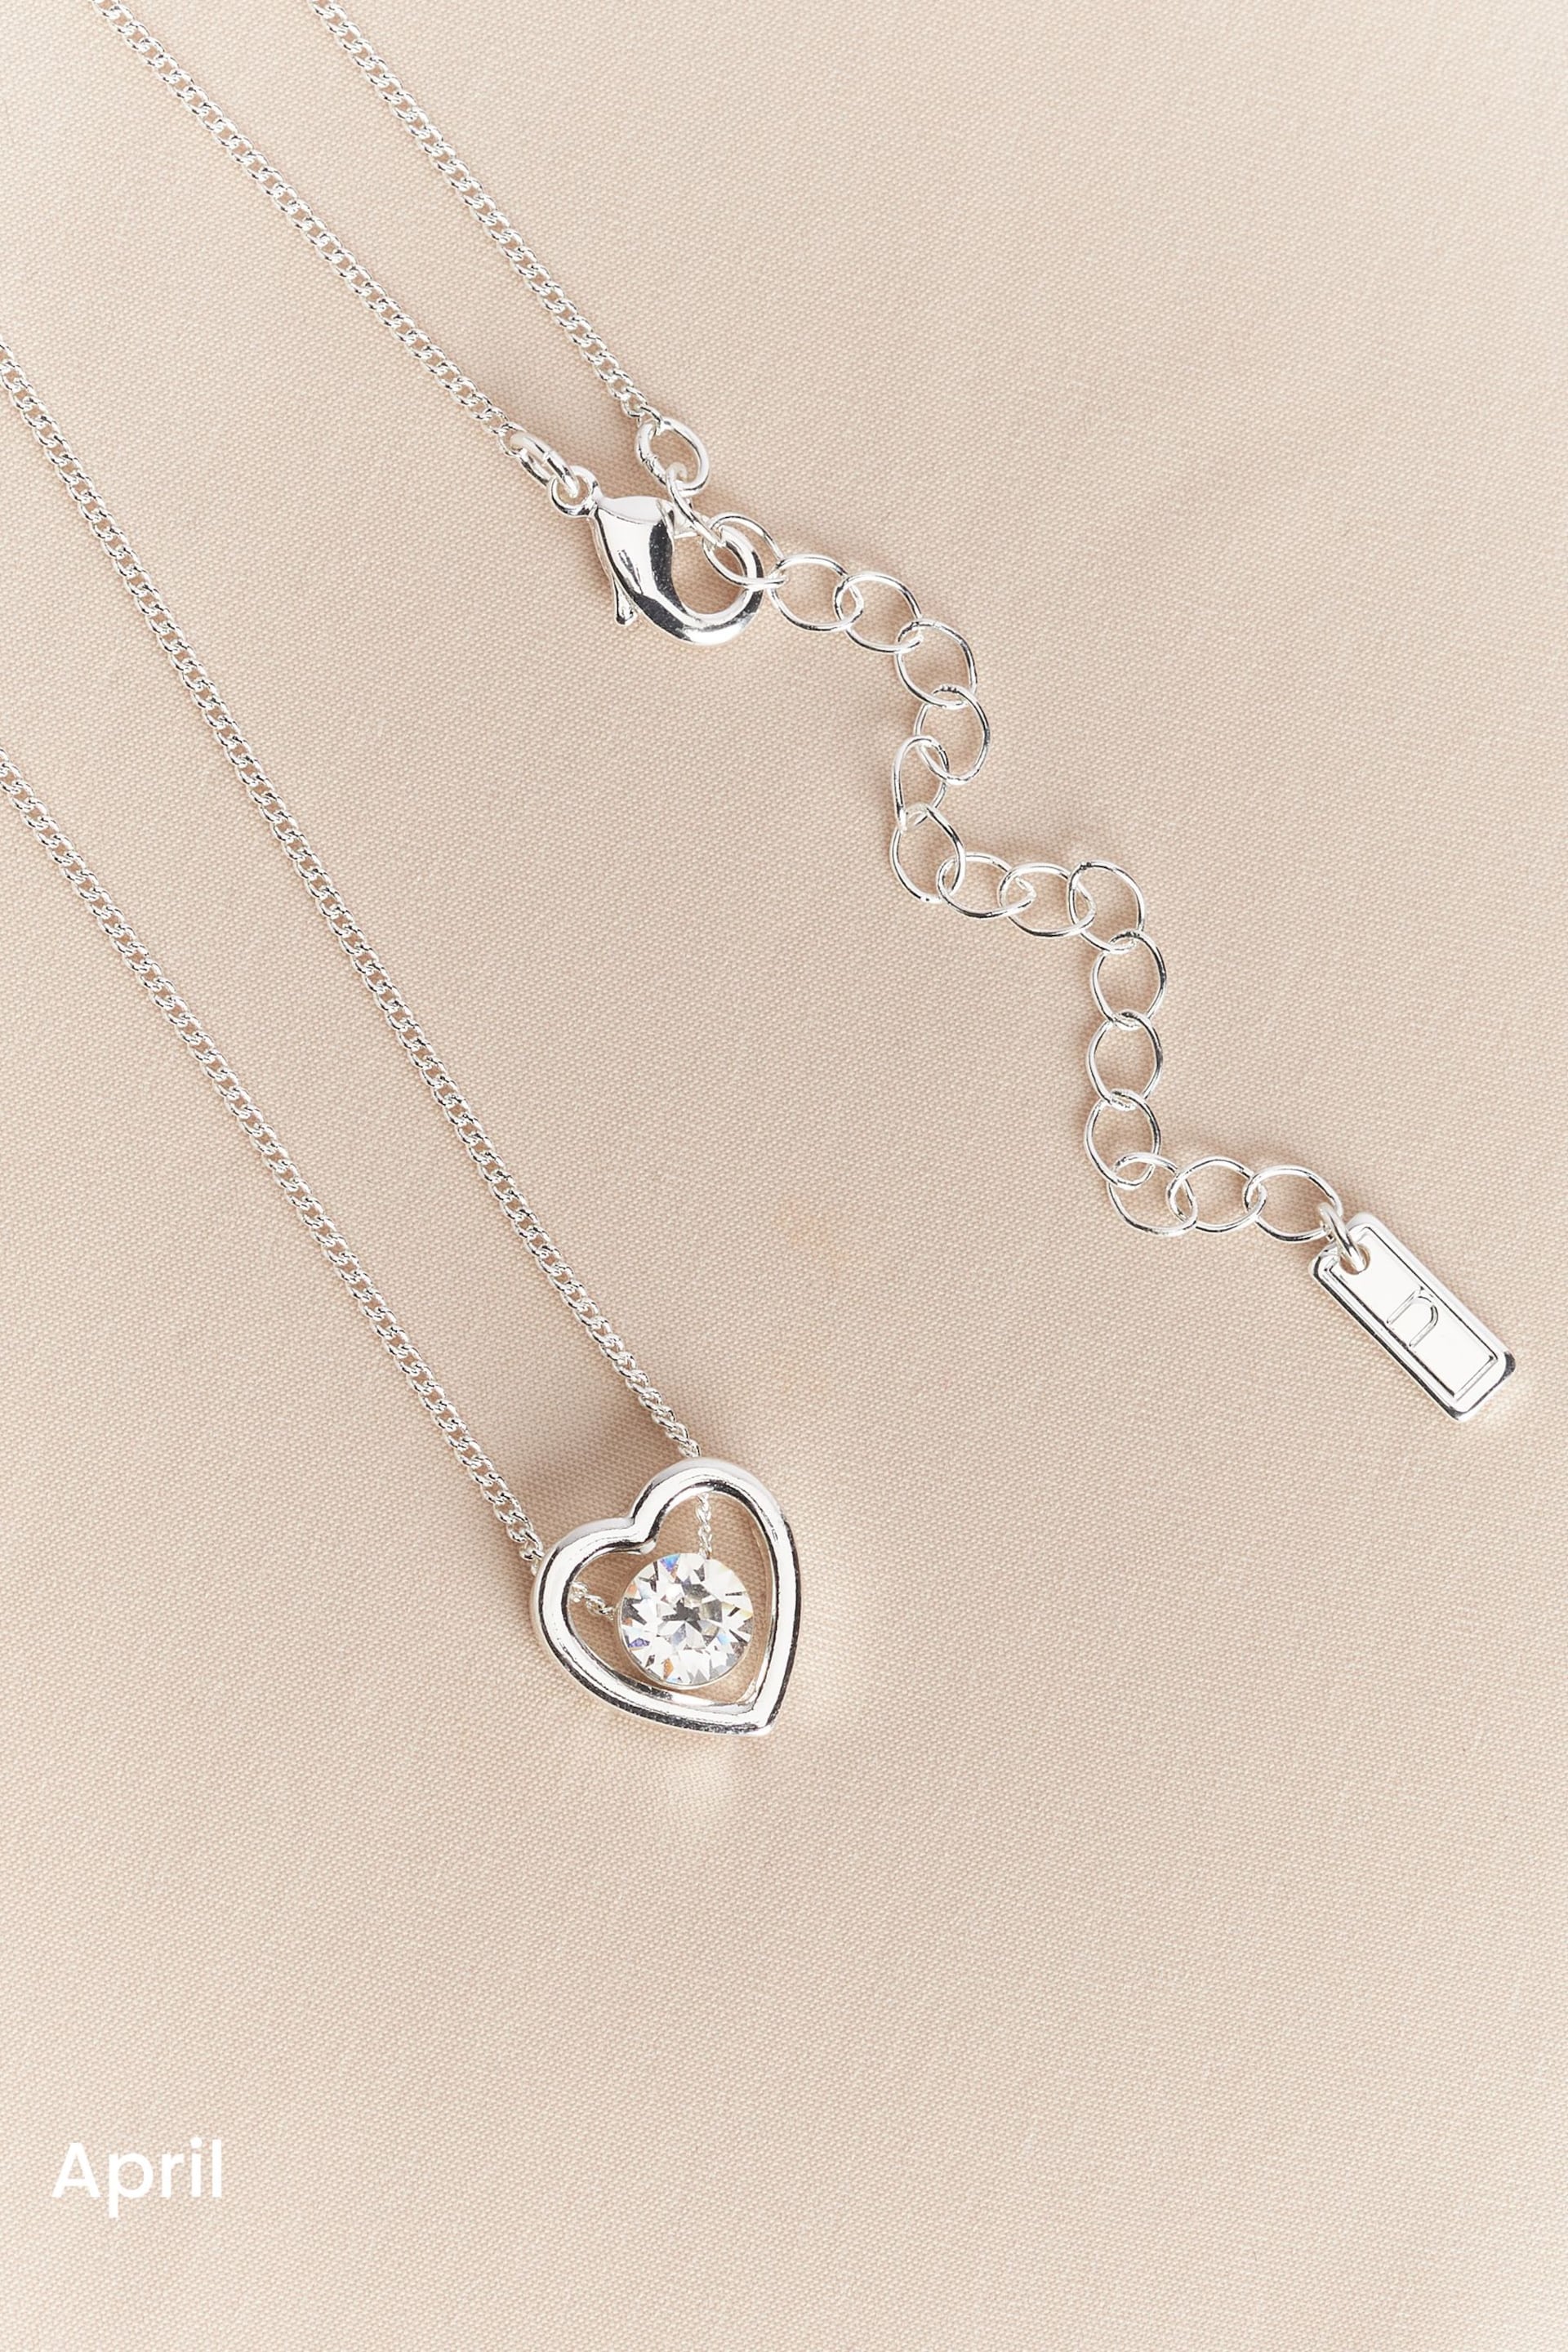 Silver Plated Heart Birthstone Necklace - Image 5 of 13